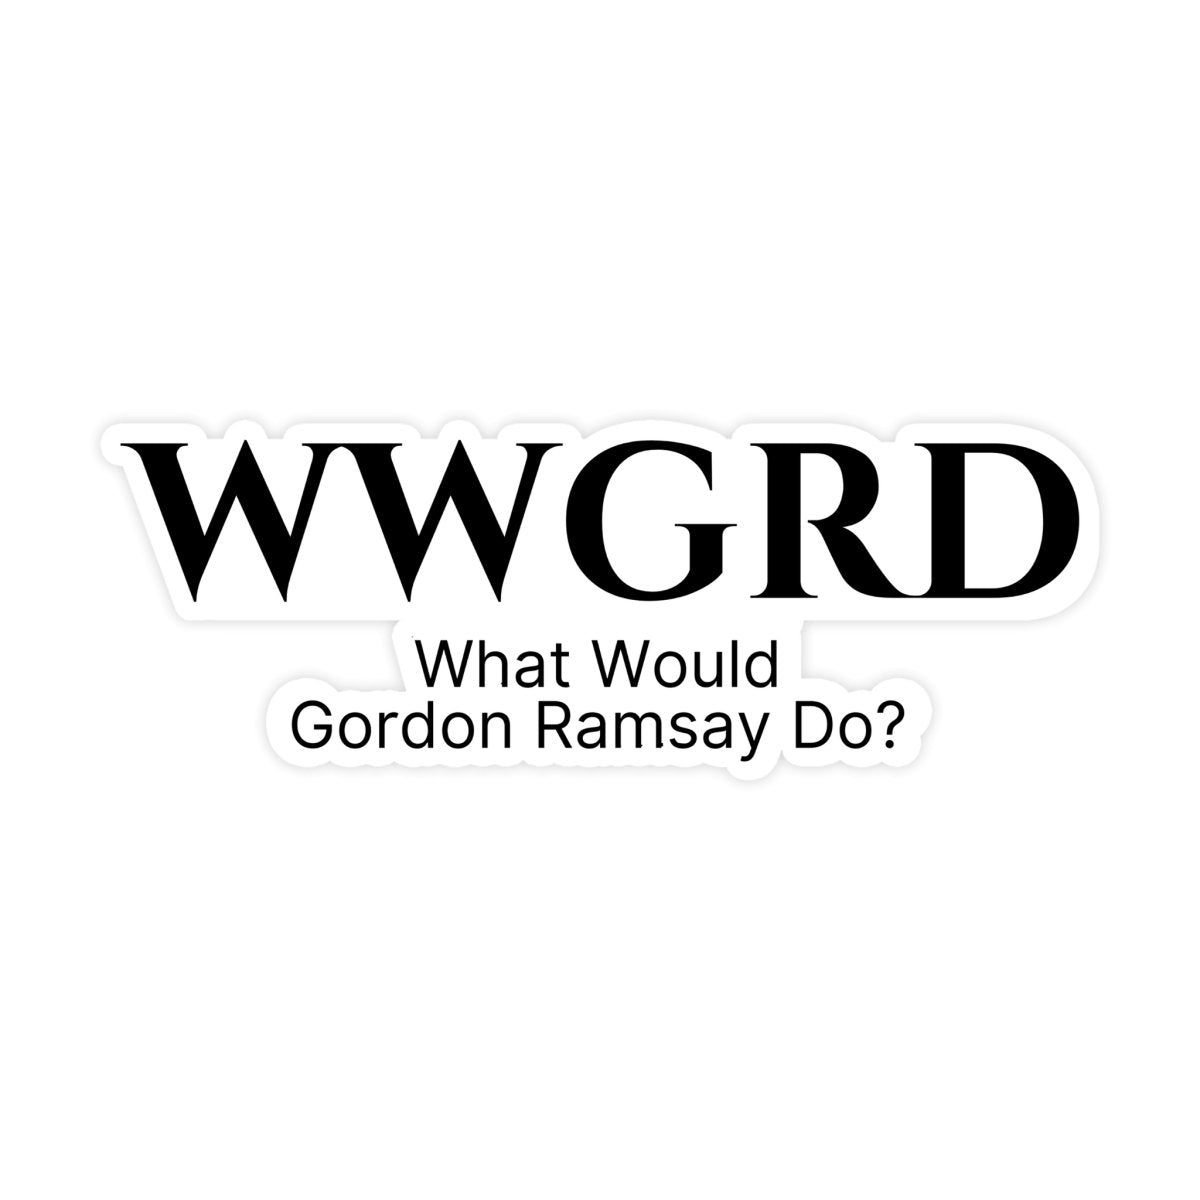 What Would Gordon Ramsay Do Sticker - stickerbullWhat Would Gordon Ramsay Do StickerRetail StickerstickerbullstickerbullTaylor_WhatWouldRamsayDo [#7]What Would Gordon Ramsay Do Sticker